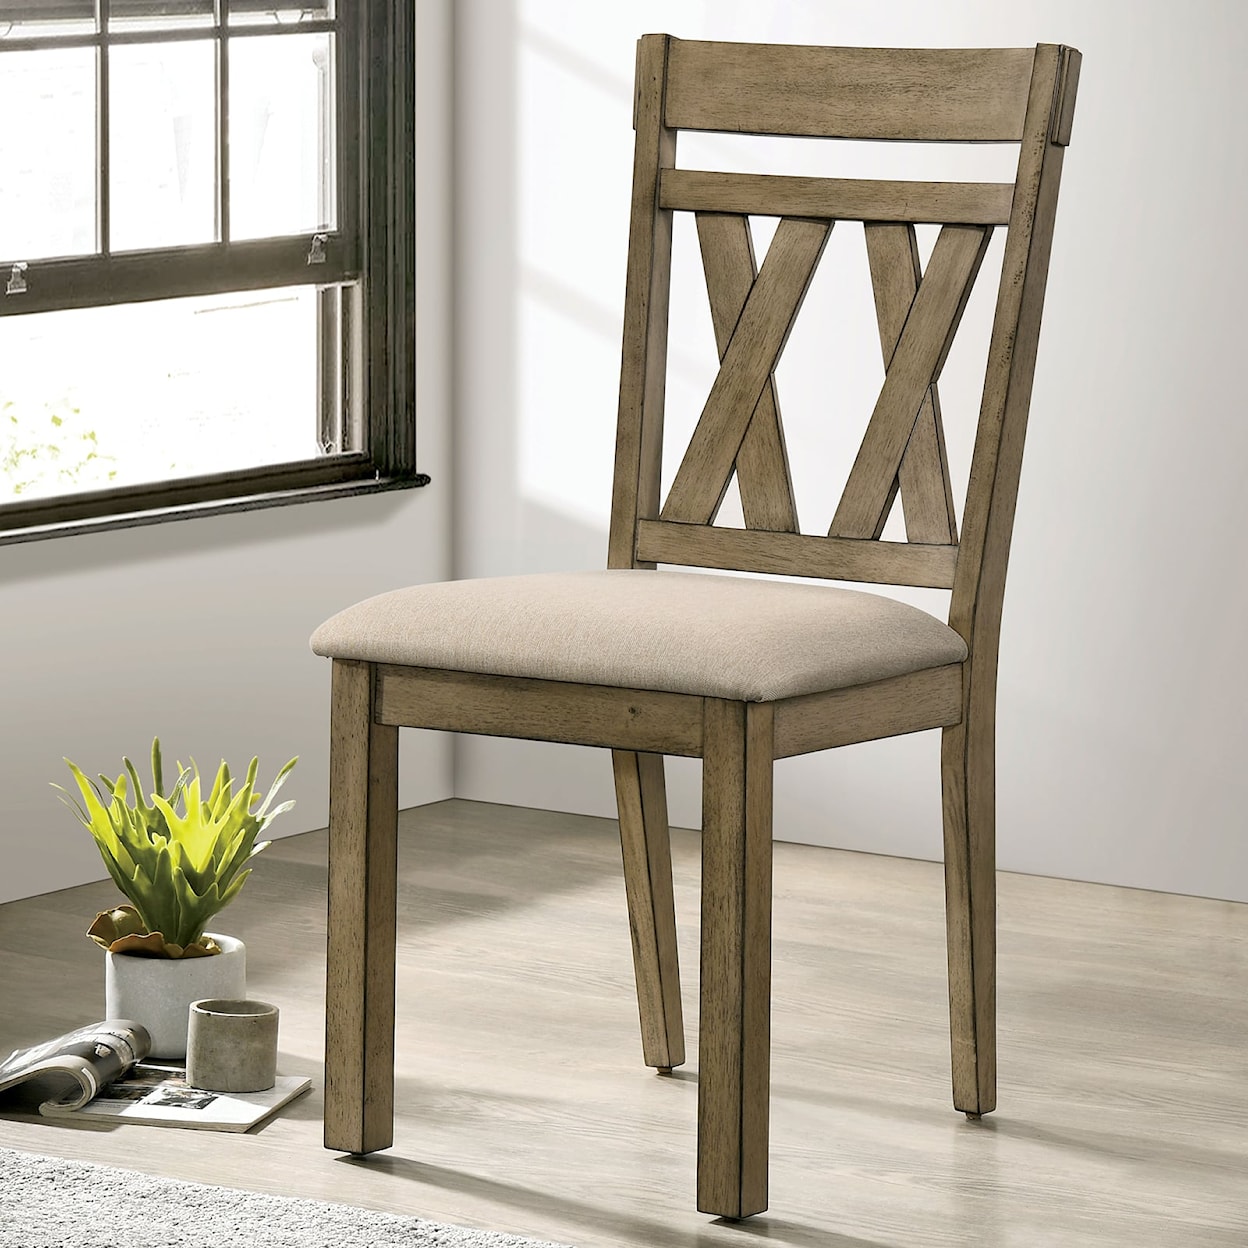 Furniture of America TEMPLEMORE Dining Side Chair